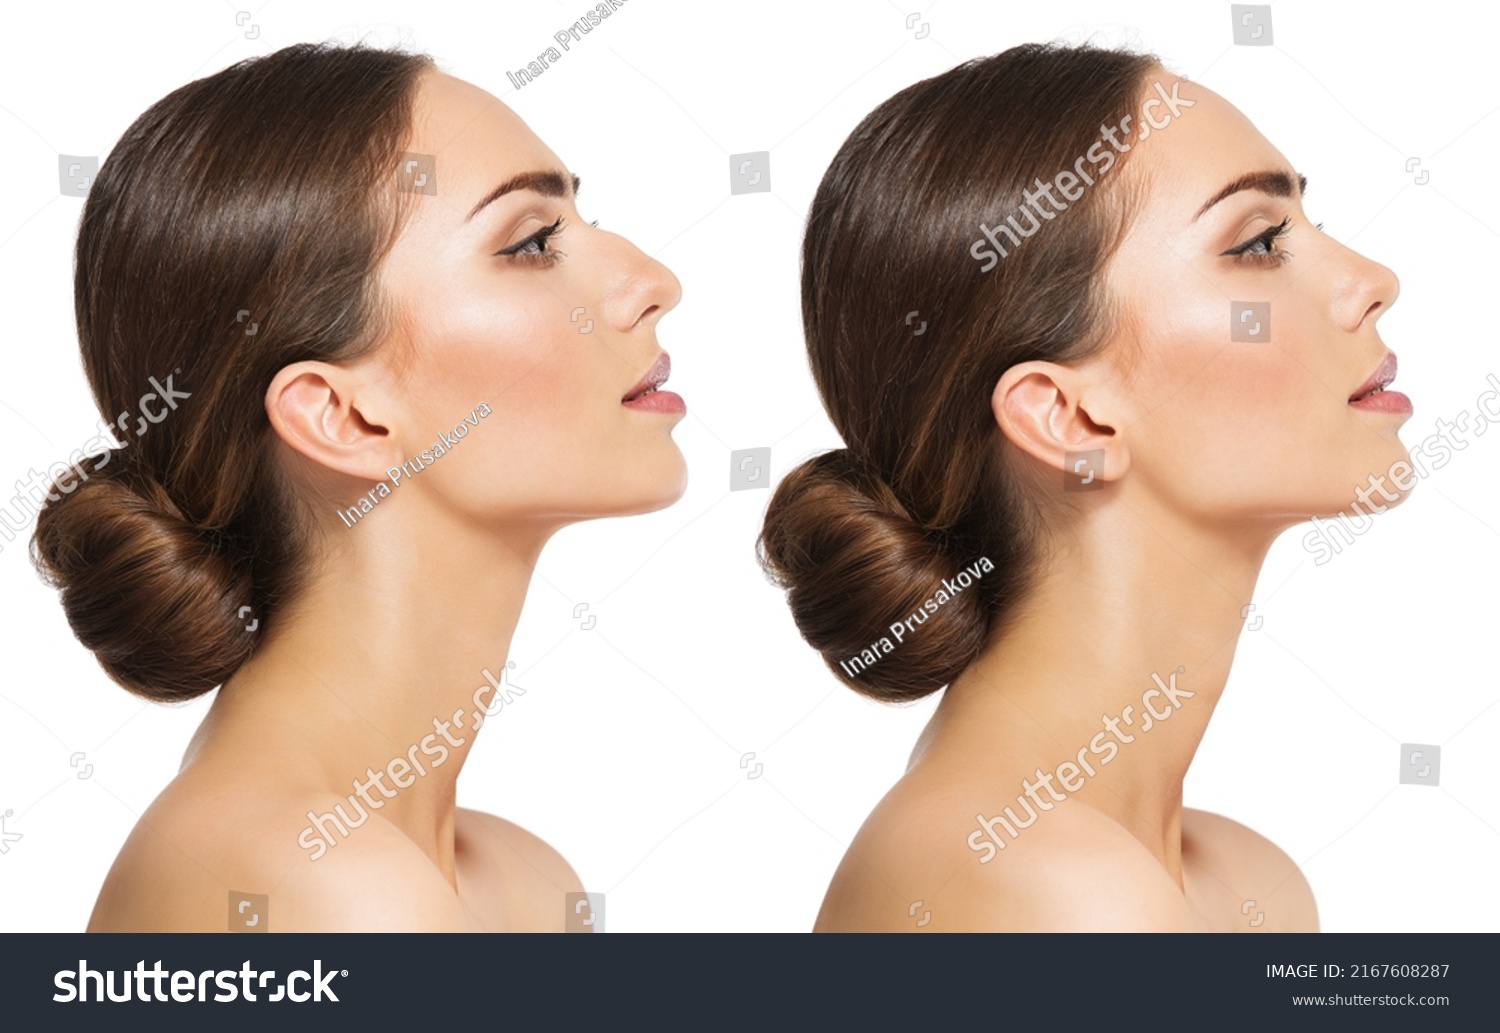 Woman Rhinoplasty. Women Nose Shape Before and After Plastic Surgery. Beauty Model Profile Side View over isolated White background #2167608287